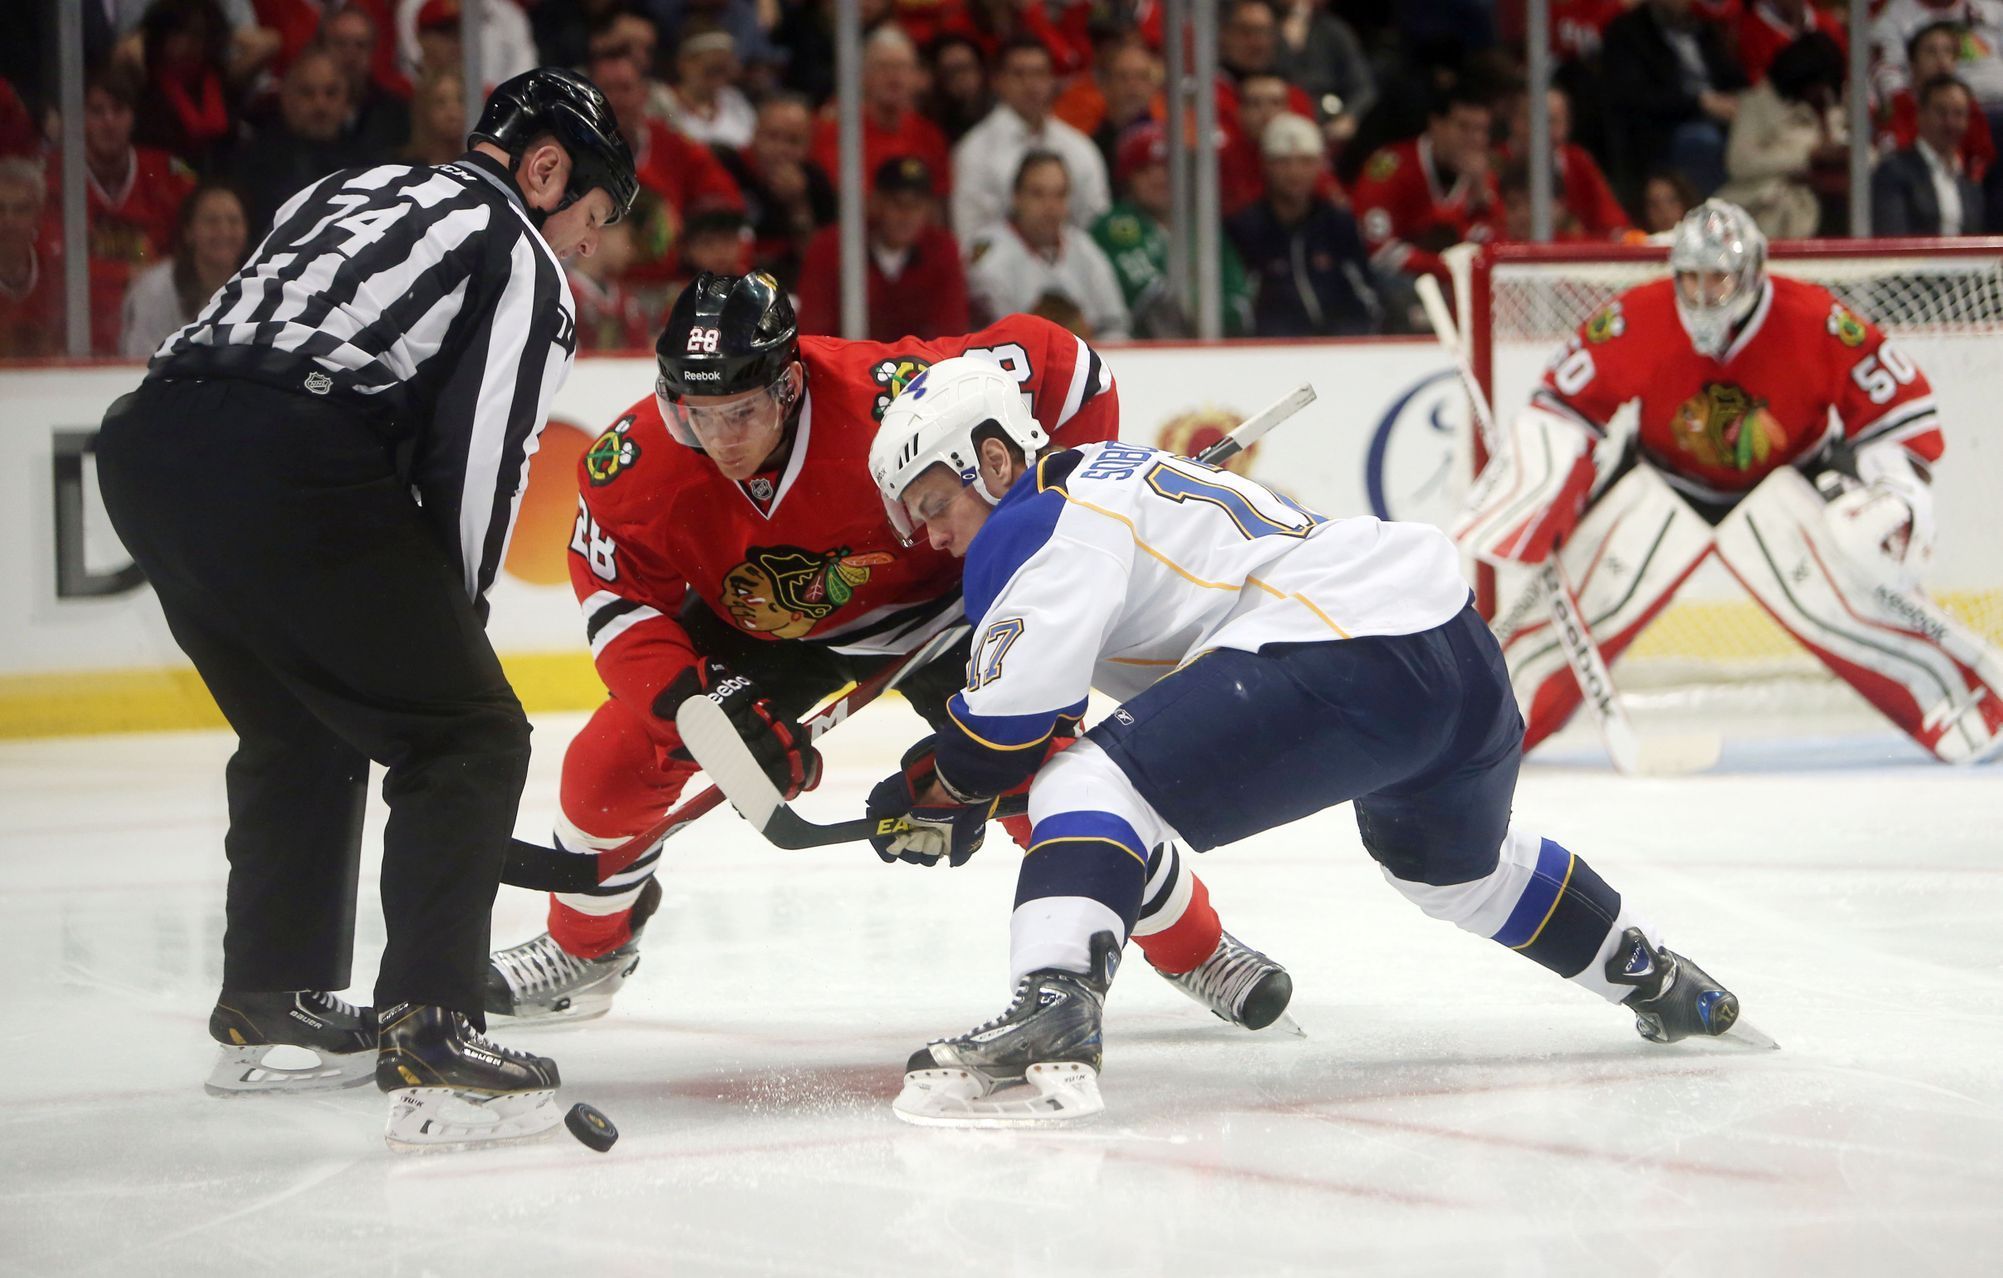 NHL: Stanley Cup Playoffs-St. Louis Blues vs Chicago Blackhawks (Smith, Sobotka)